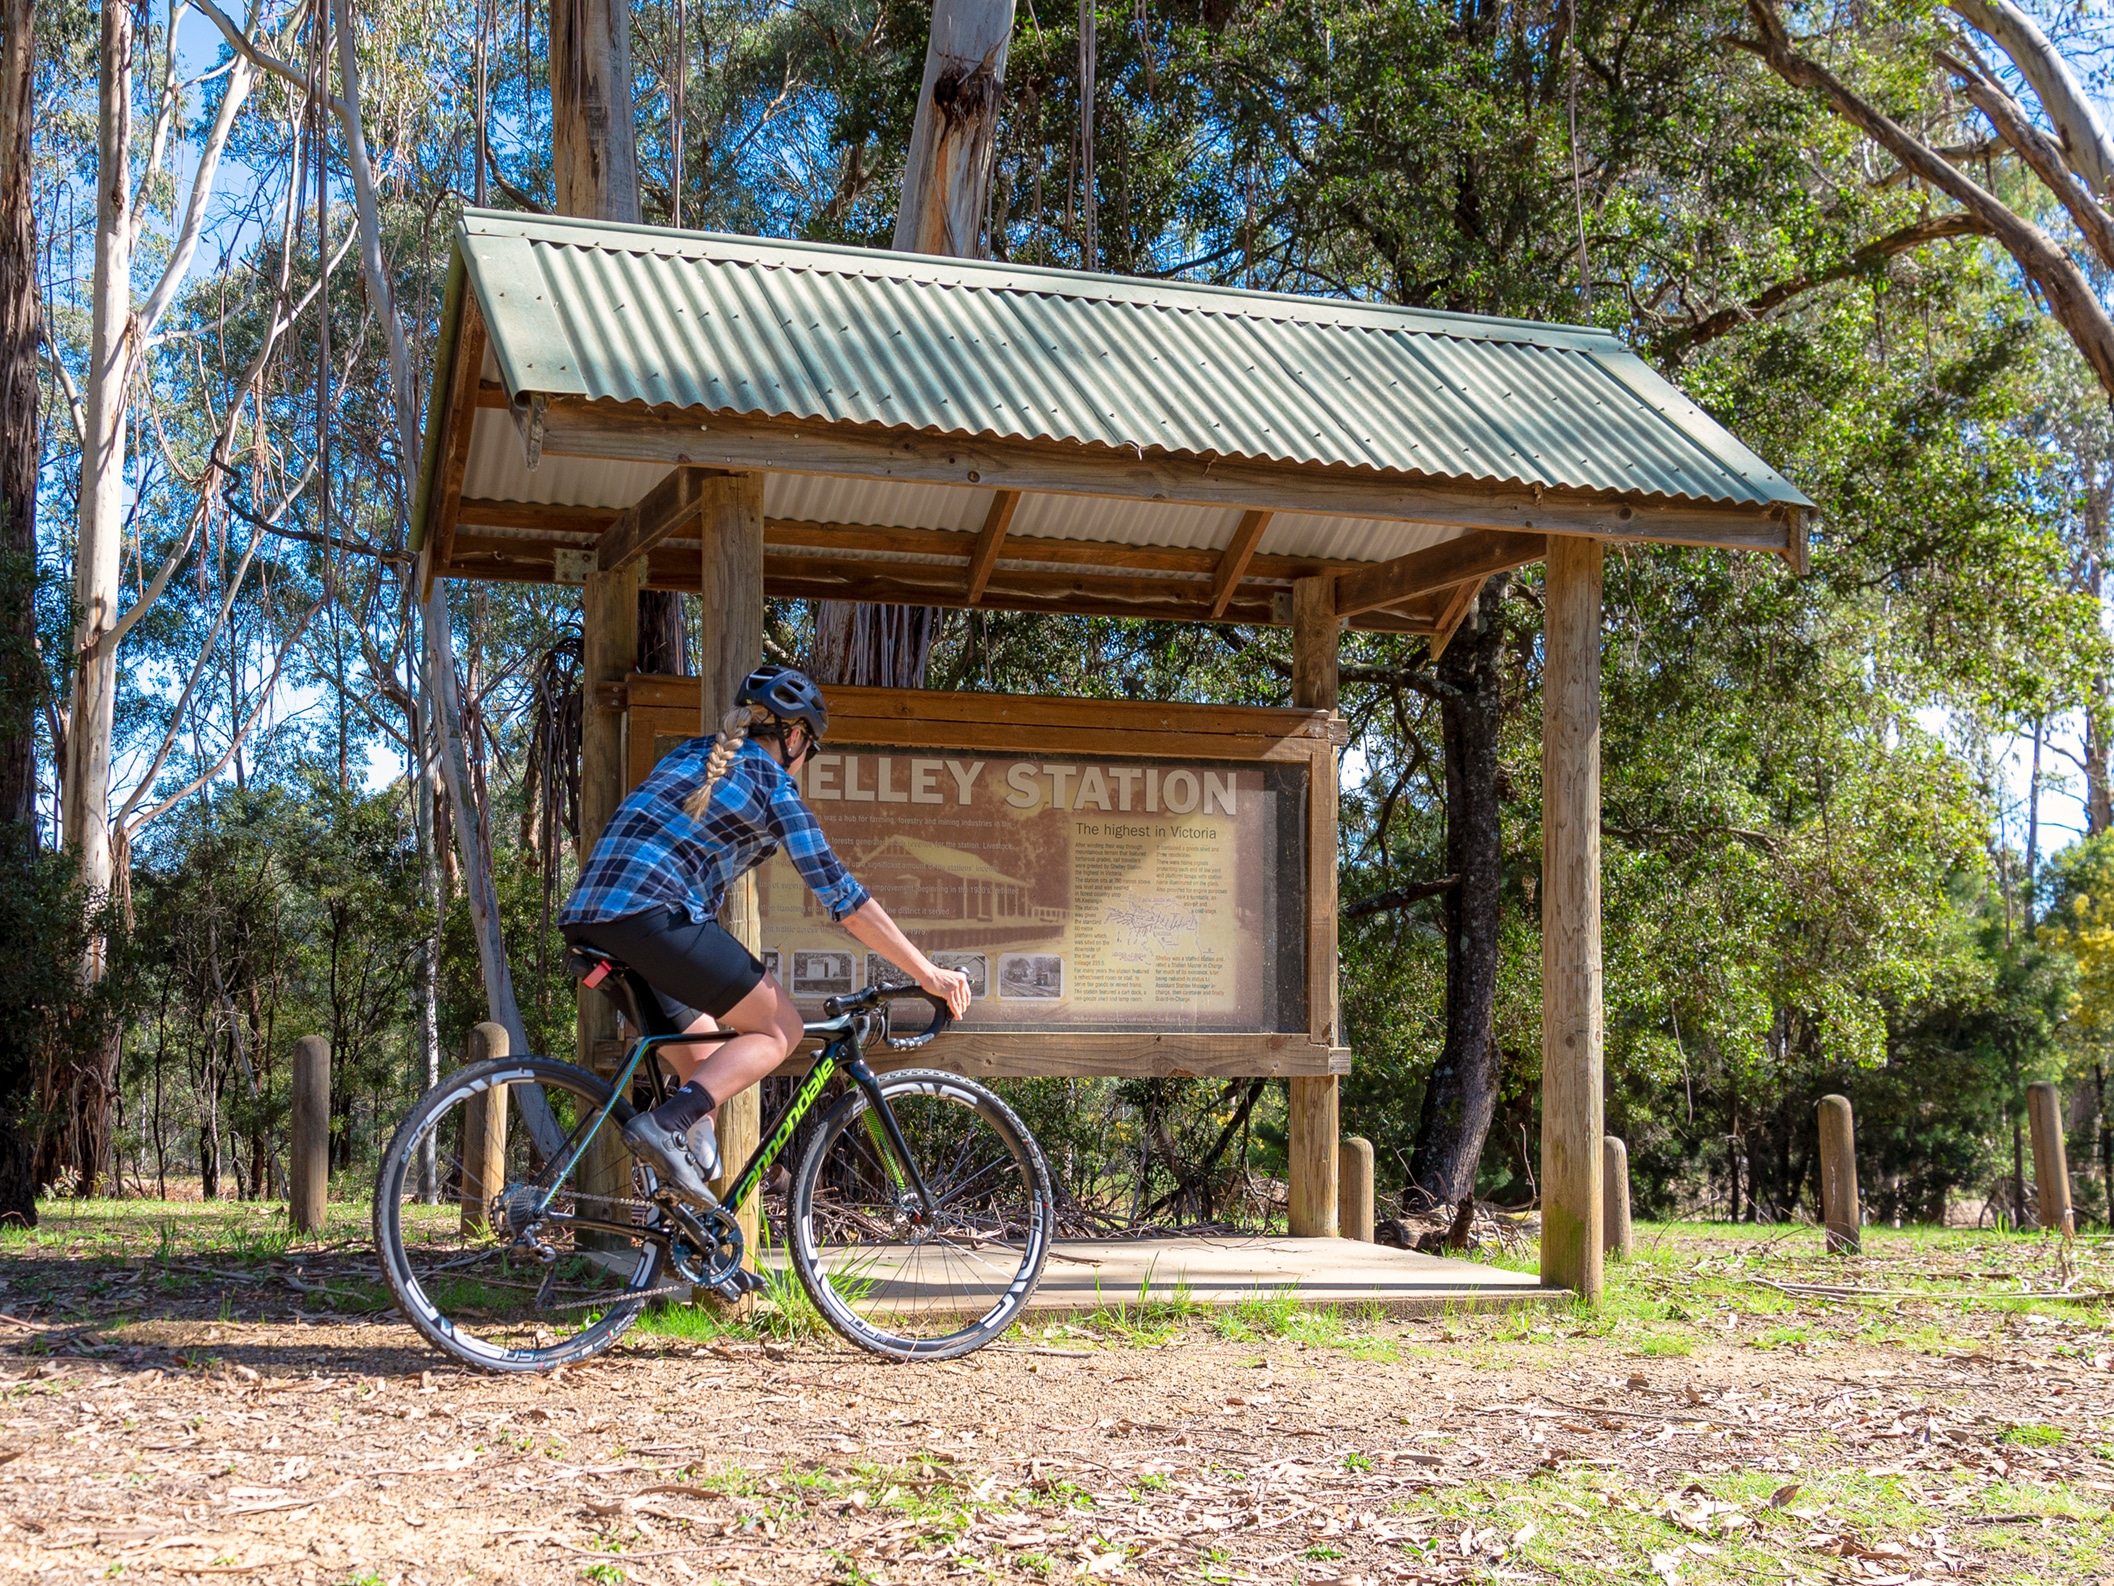 A cyclist at the old Shelley Station sign on the High Country Rail Trail